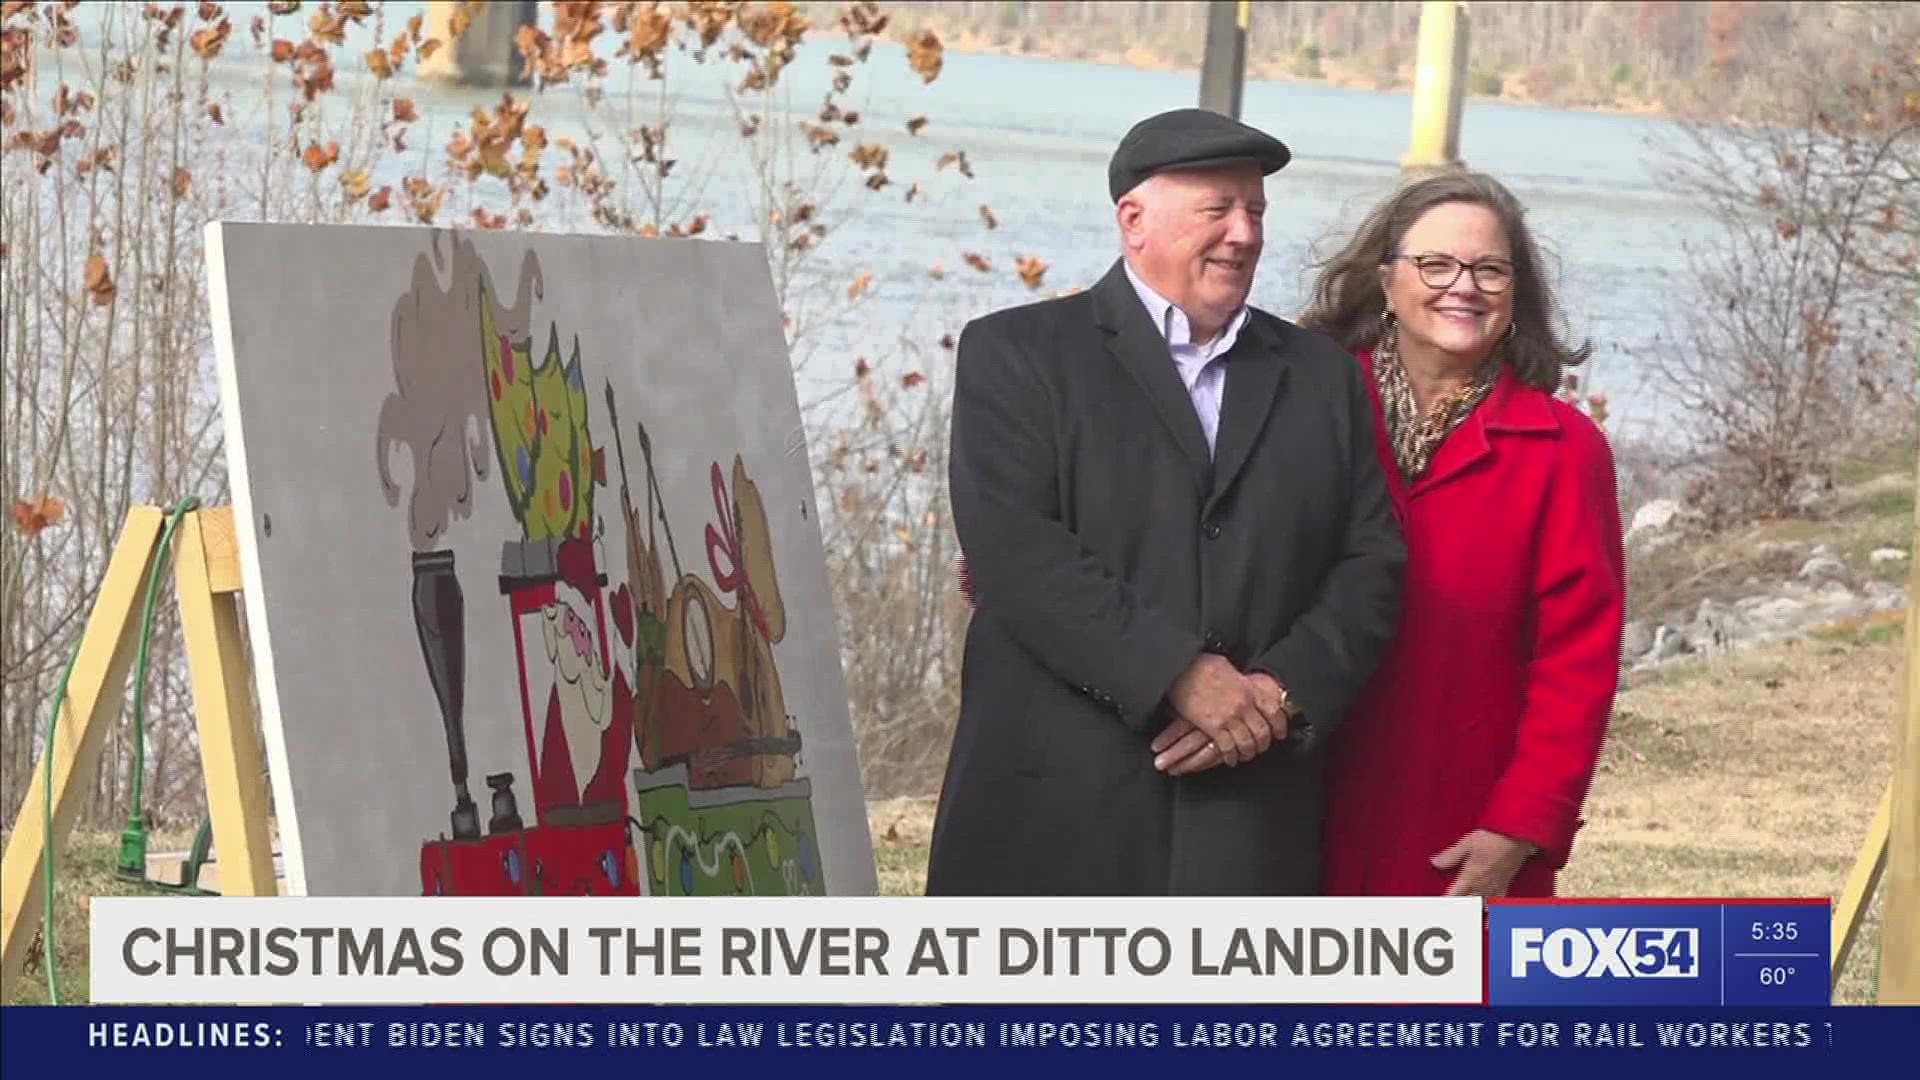 Head down to Ditto Landing for holiday fun.